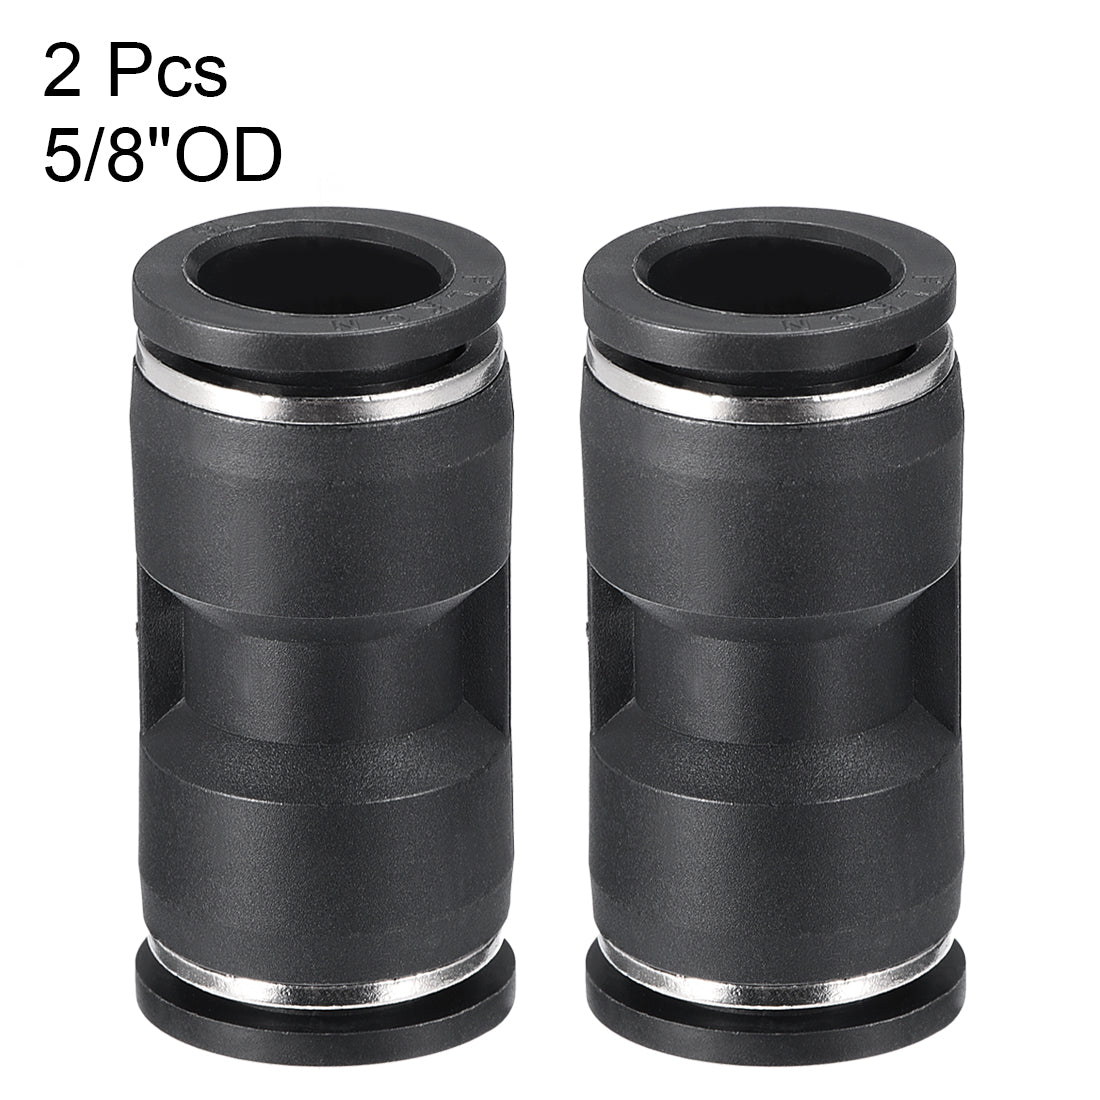 uxcell Uxcell 2pcs Push to Connect Fittings Tube Connect 16mm or 5/8" Straight od Push Fit Fittings Tube Fittings Push Lock